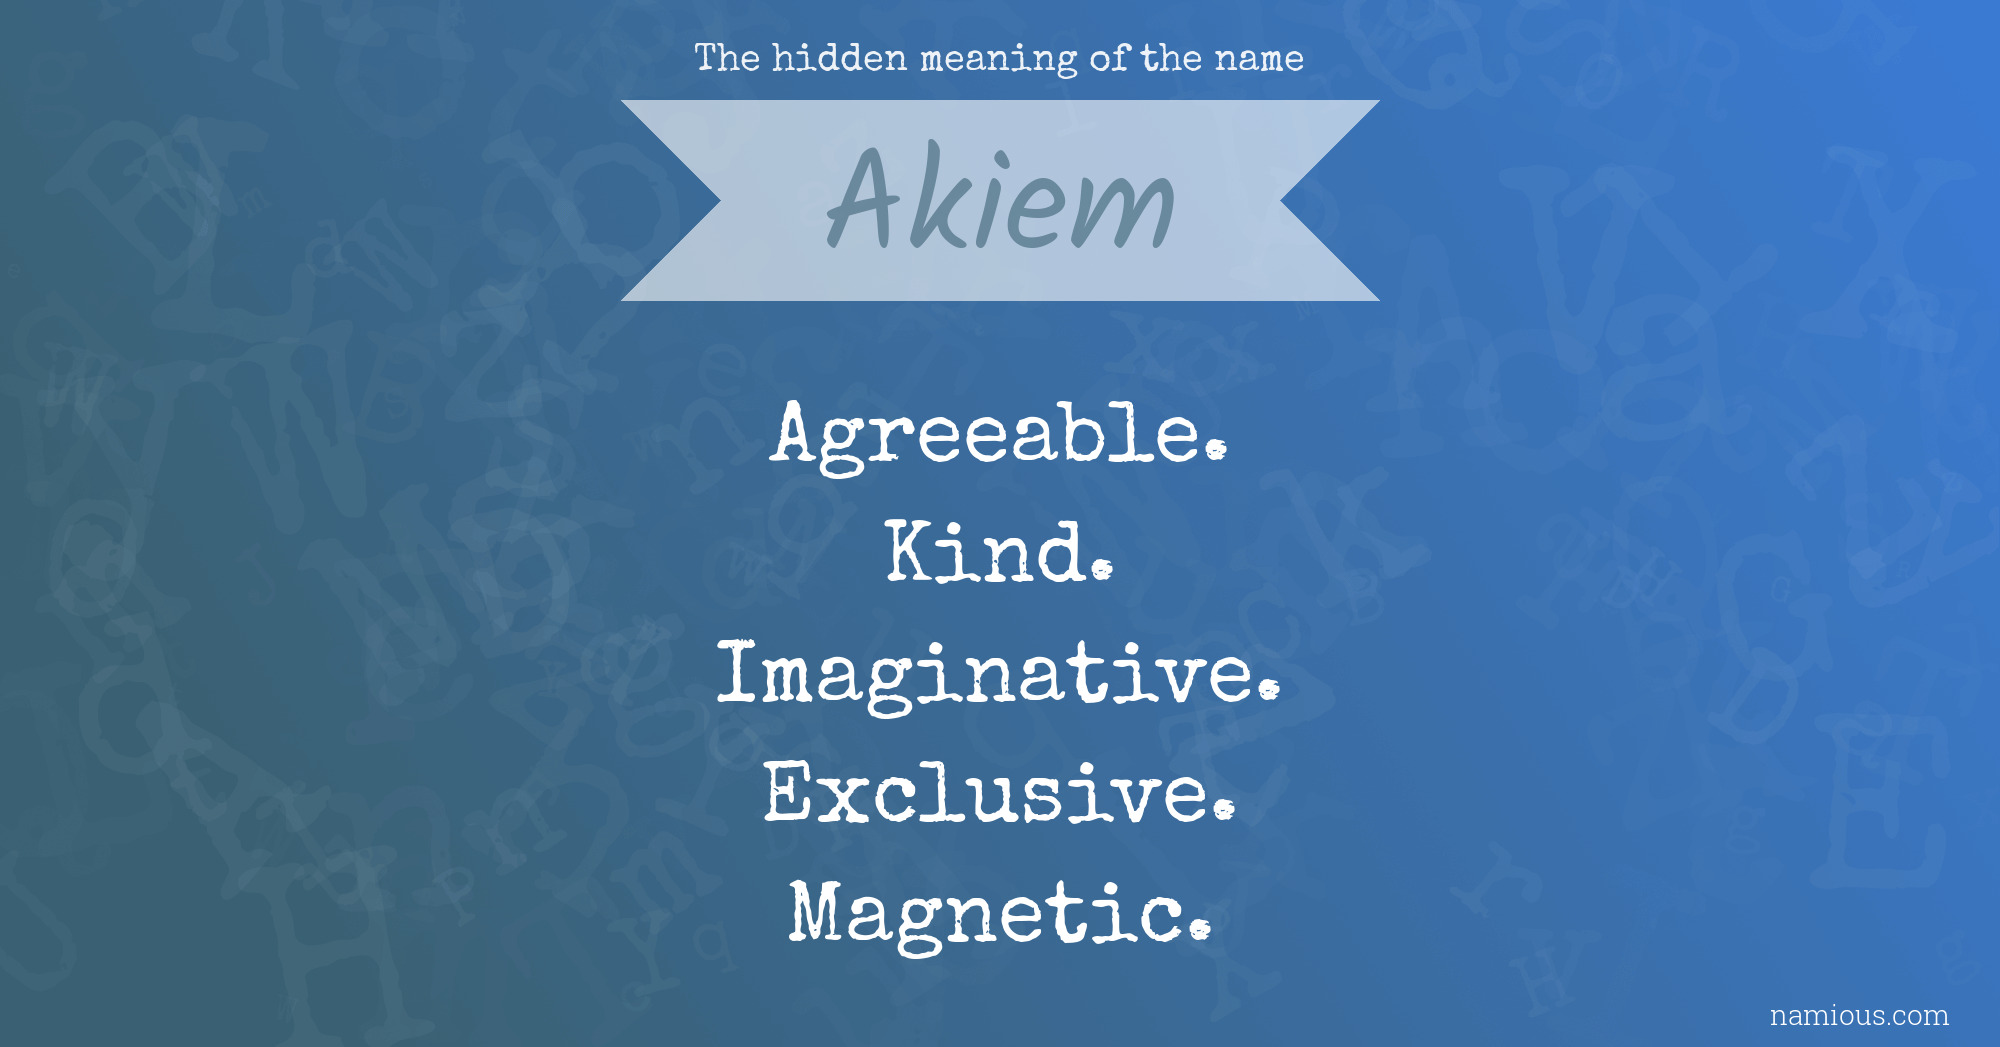 The hidden meaning of the name Akiem